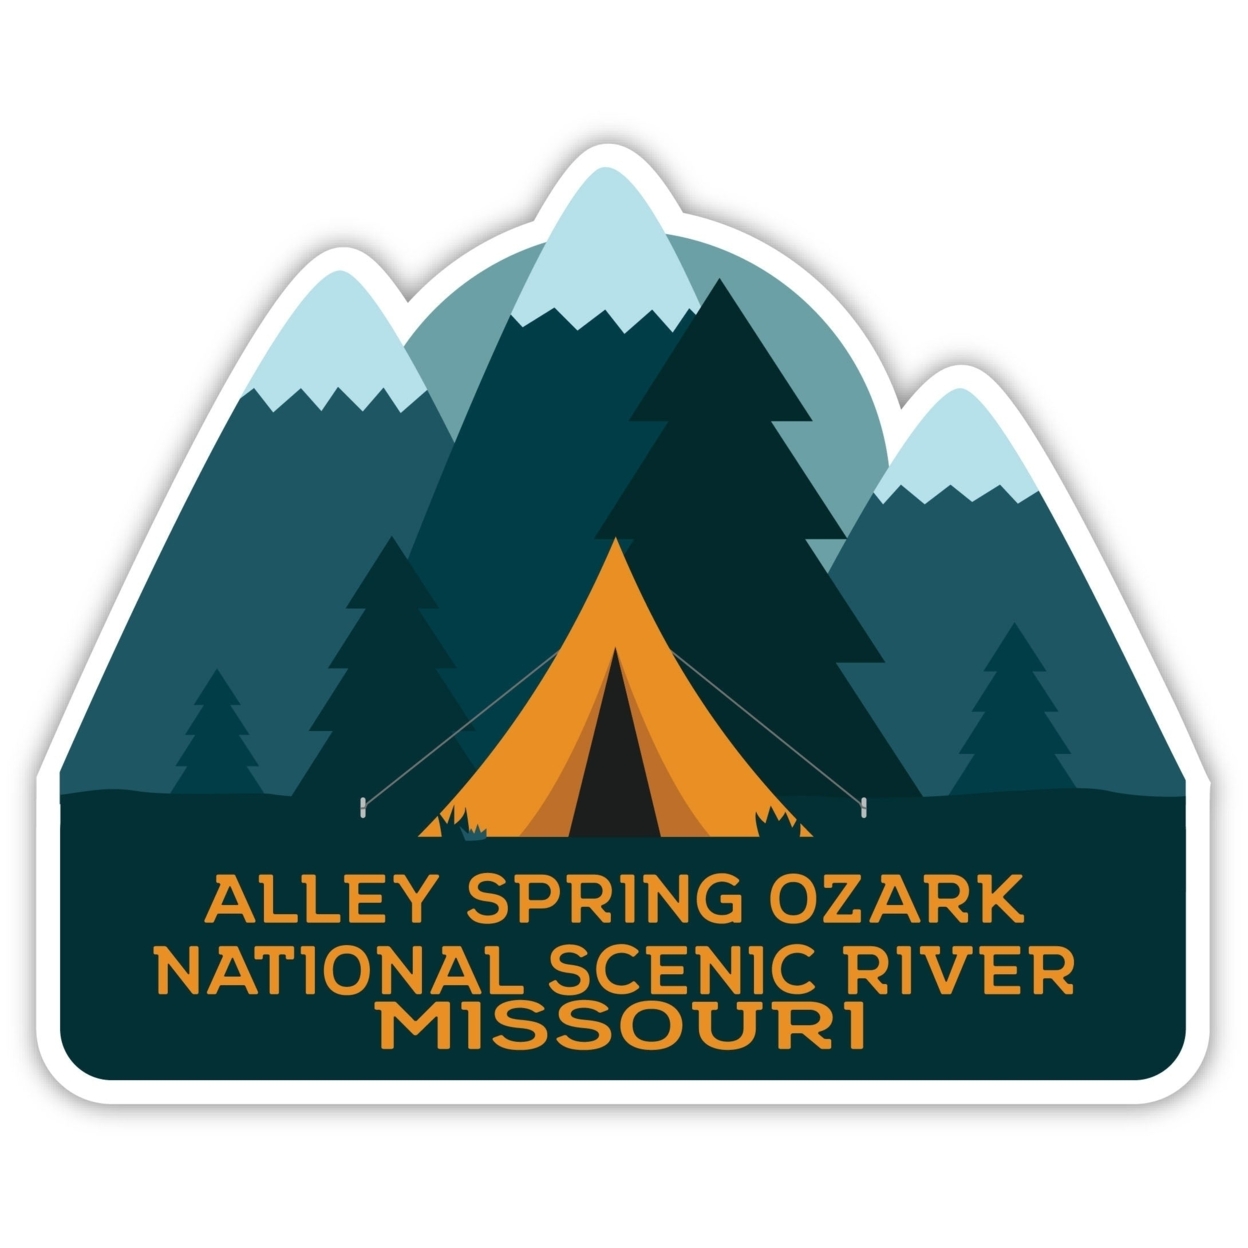 Alley Spring Ozark National Scenic River Missouri Souvenir Decorative Stickers (Choose Theme And Size) - 4-Pack, 2-Inch, Tent